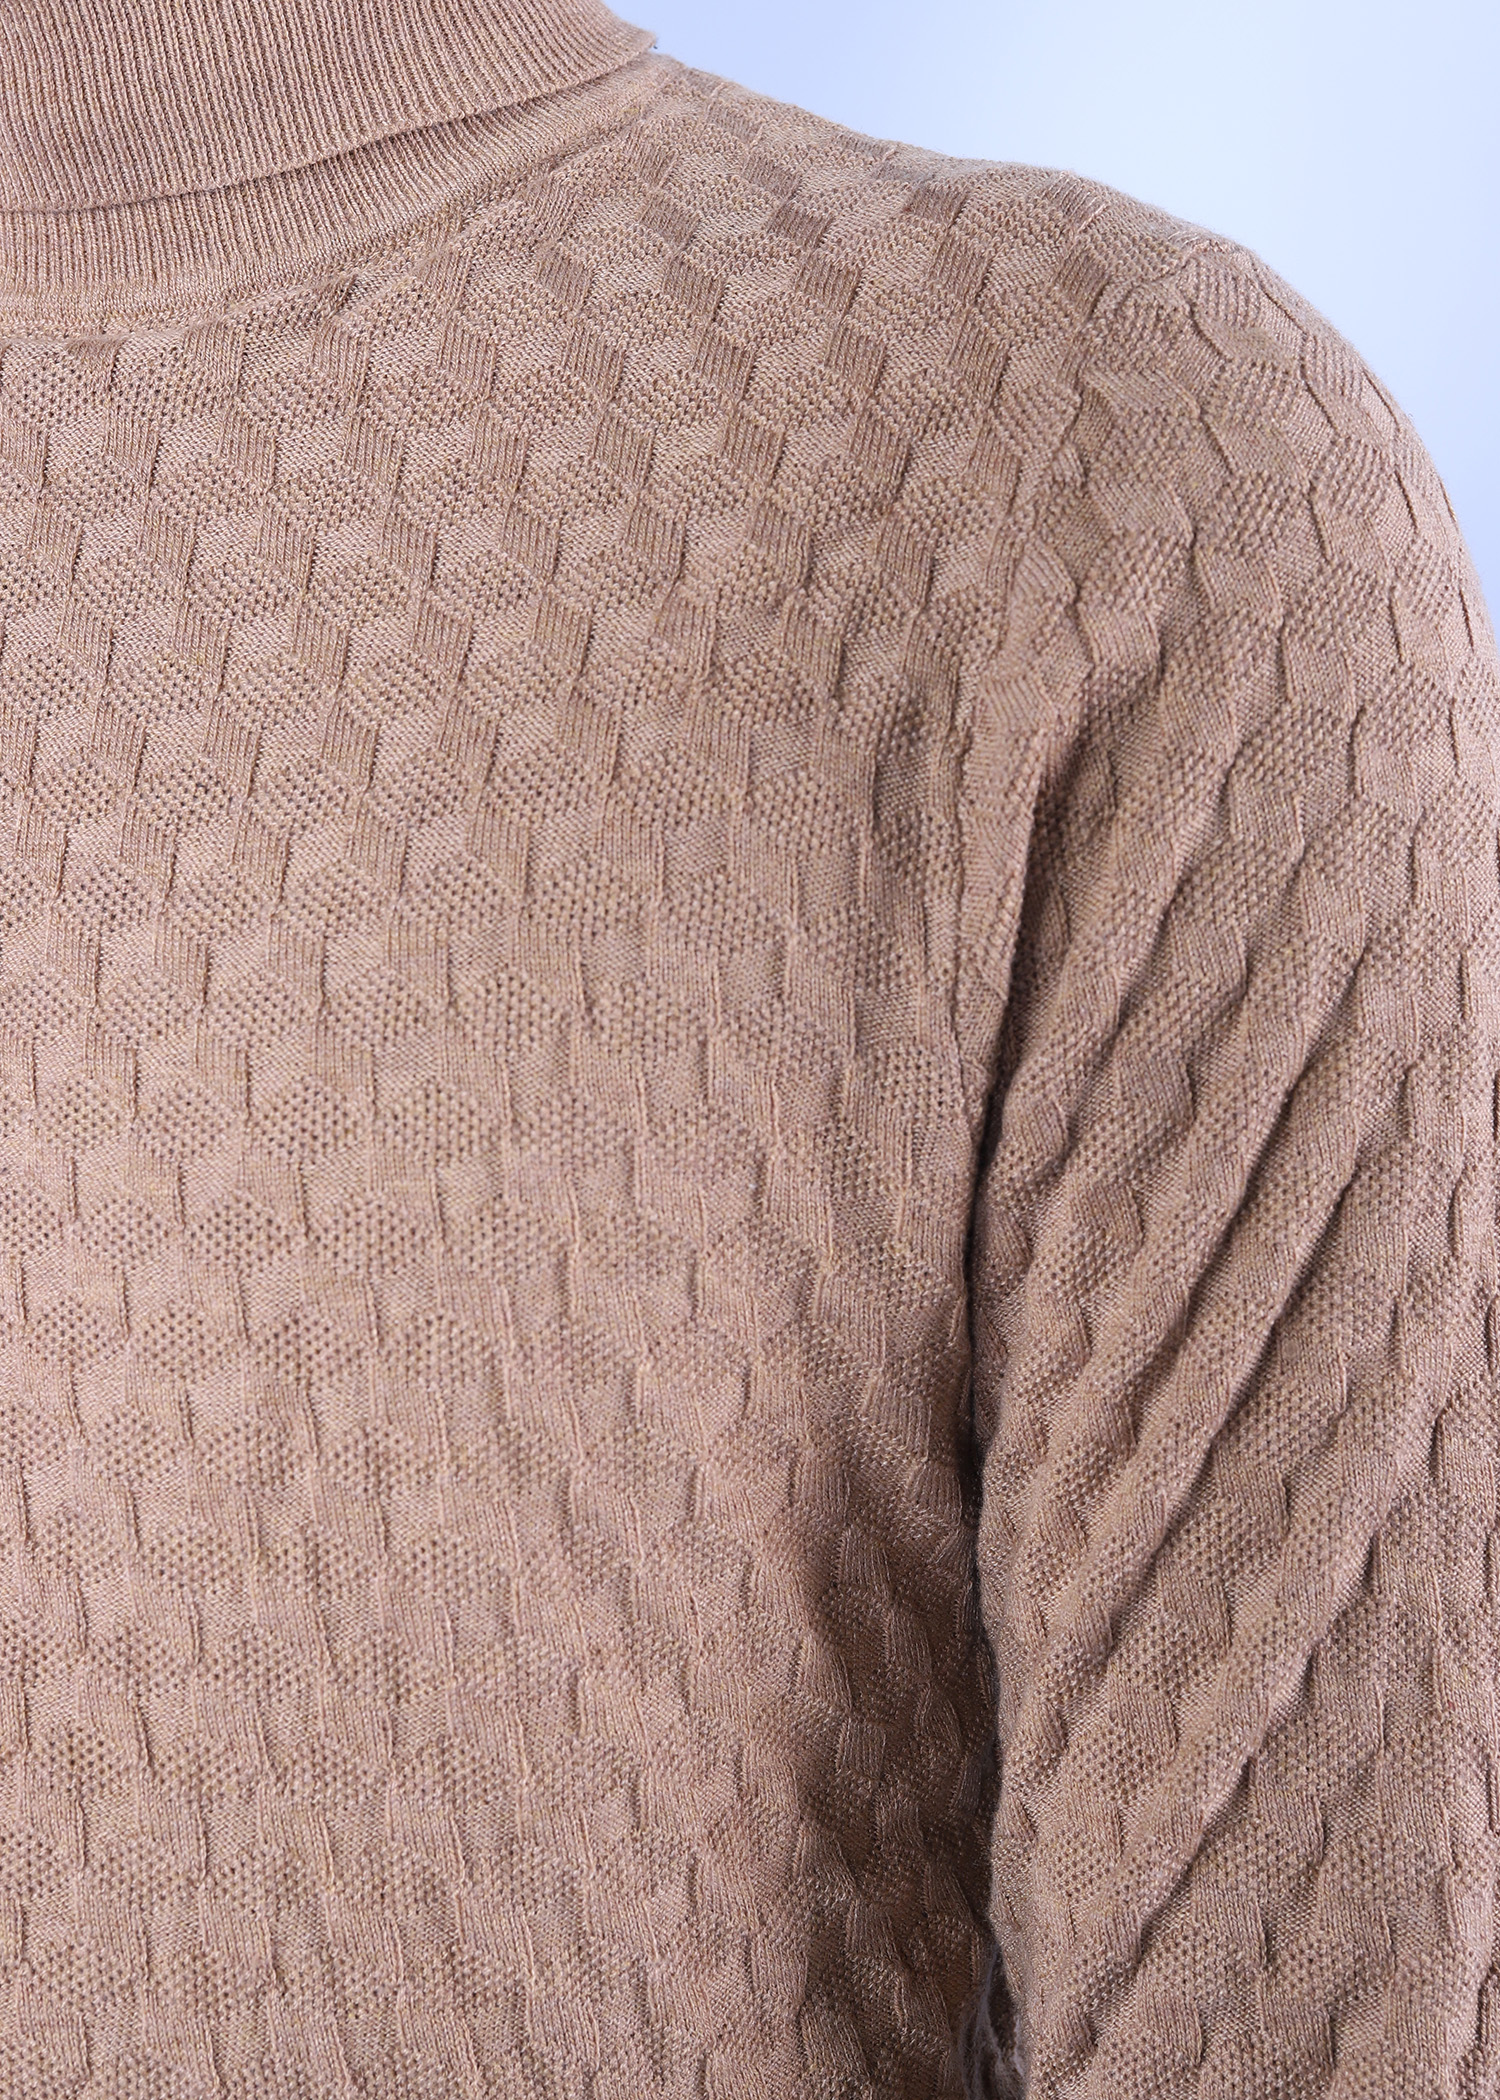 hornero ii sweater camel color close front view